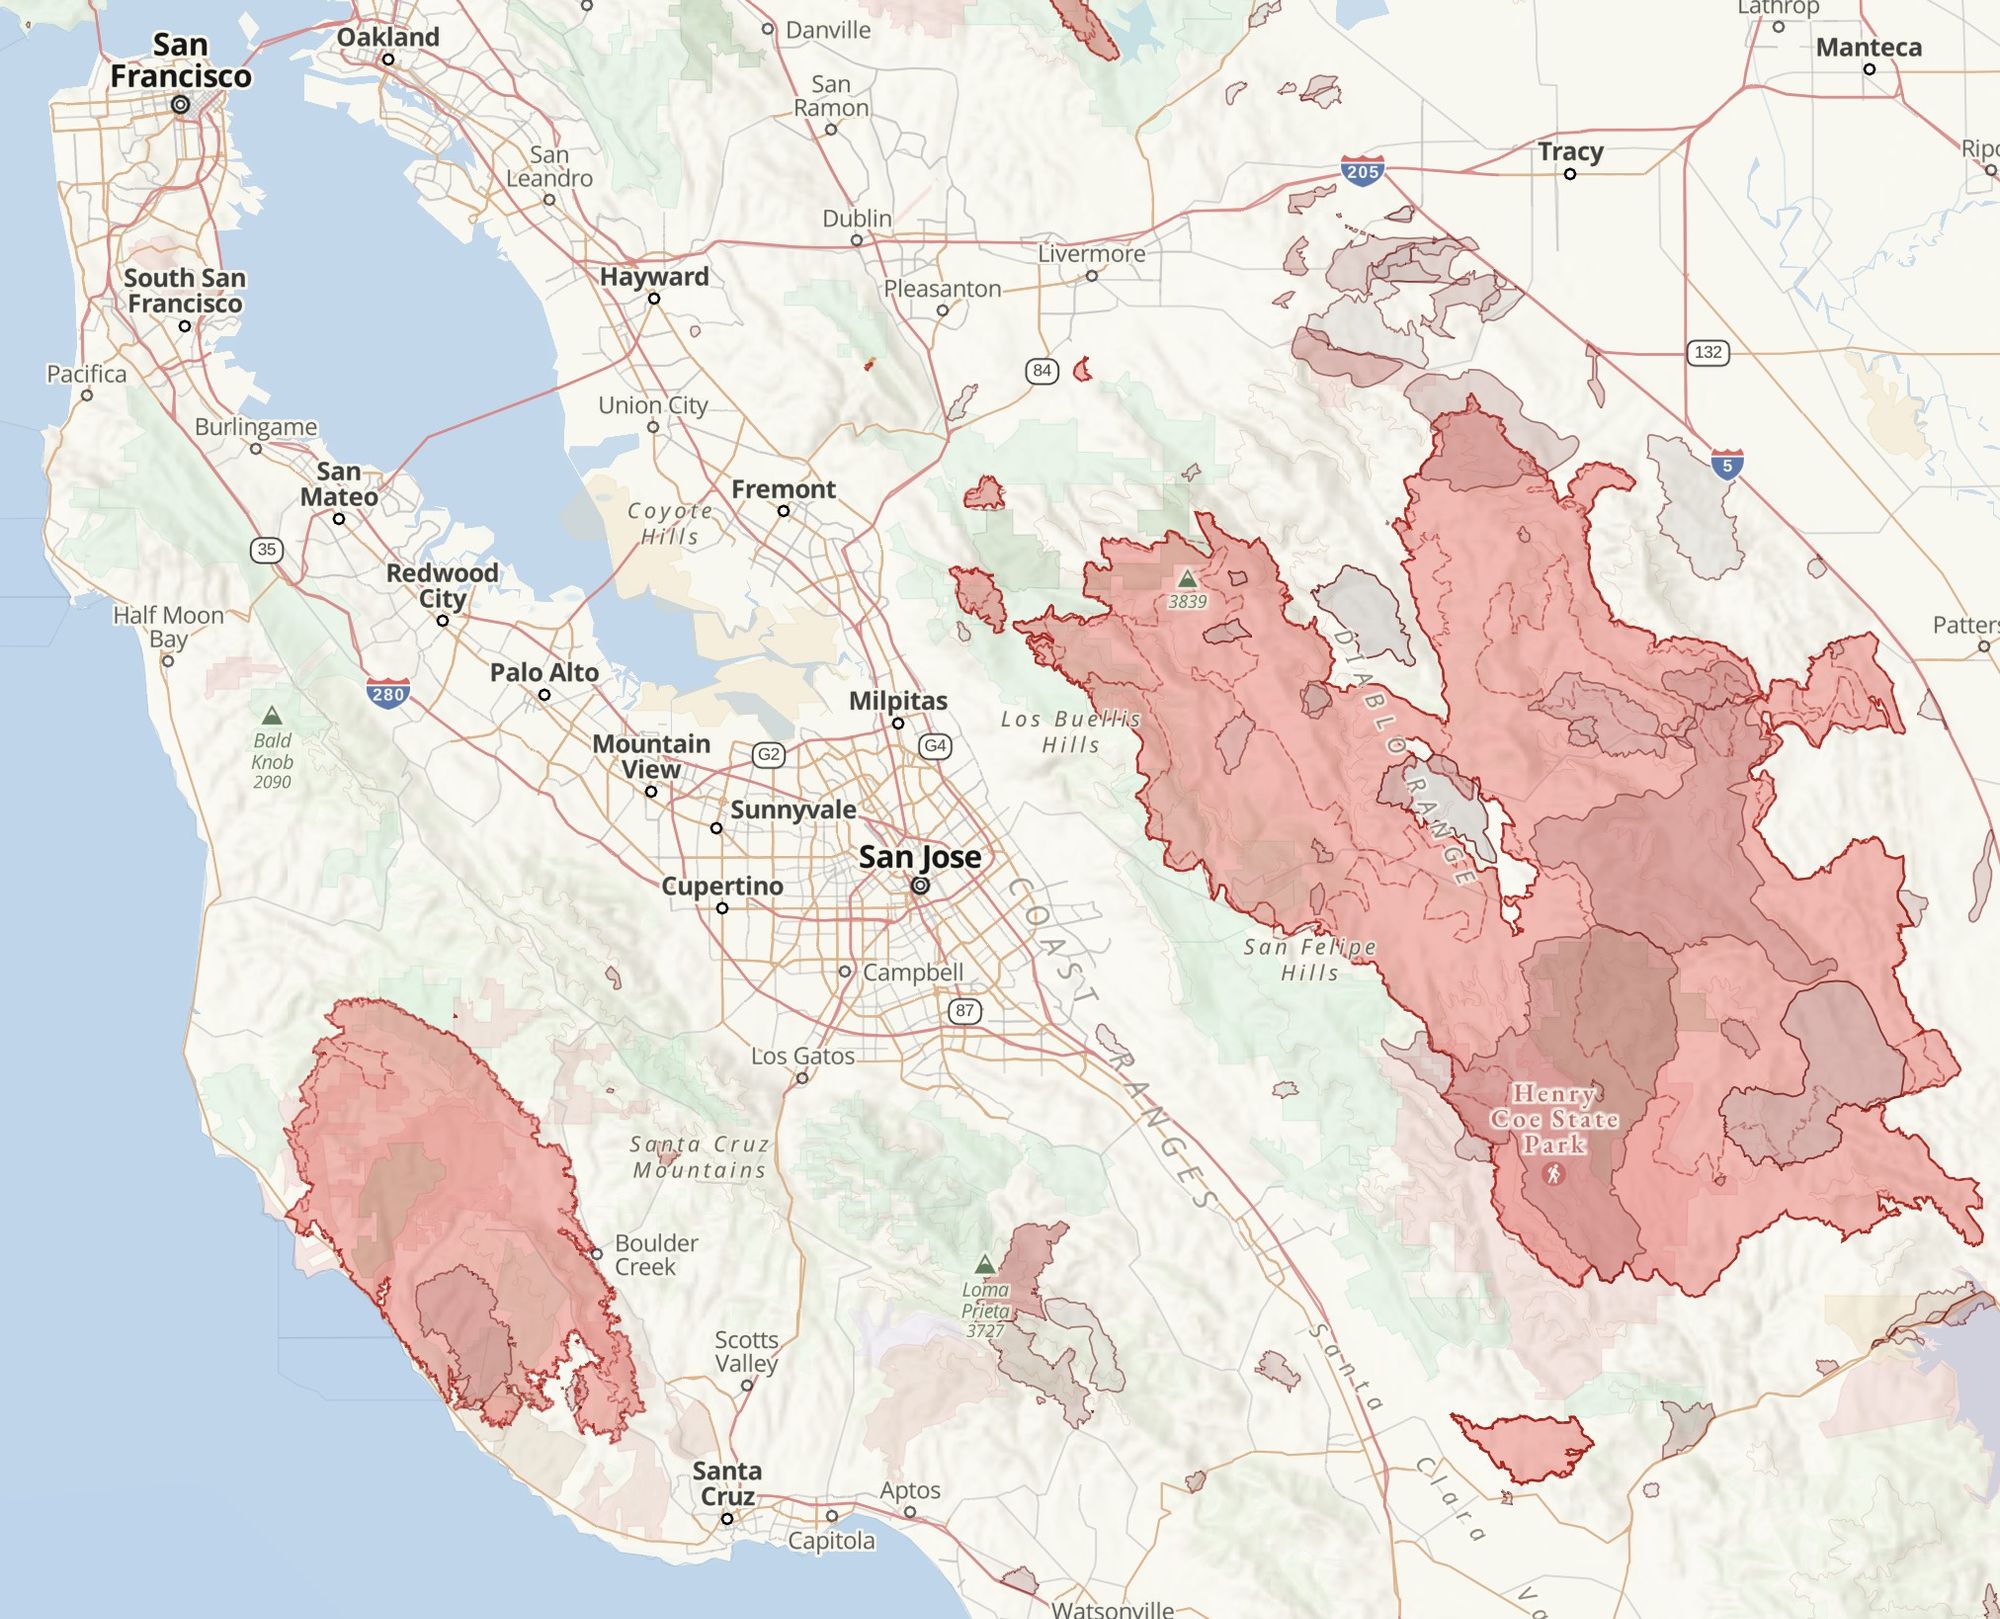 A map showing large burn areas to the east and west of the SF Bay Area. 